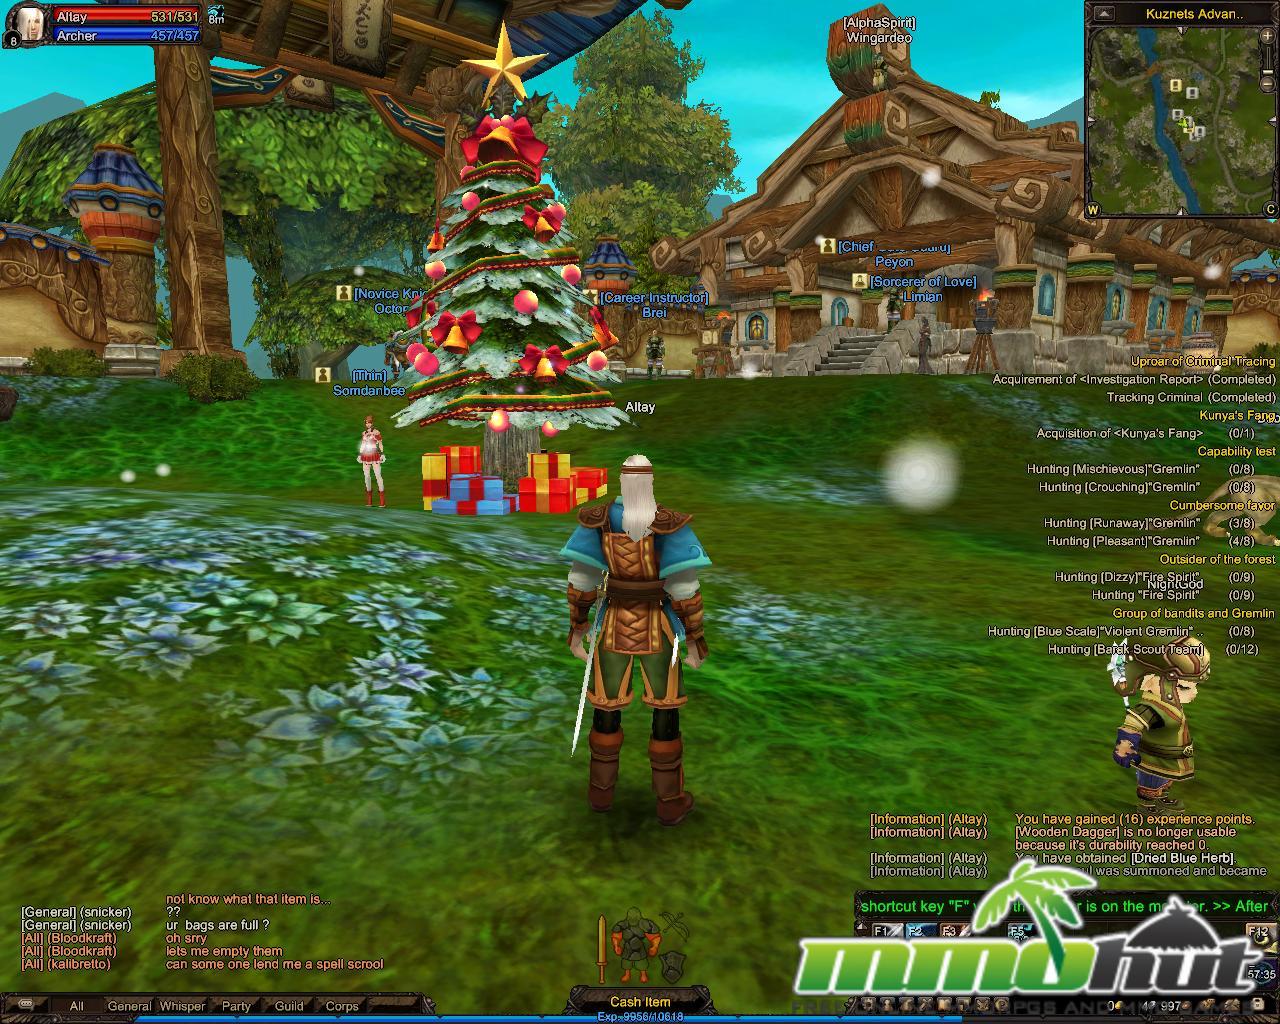 The Very Best MMORPG Games 2010-2011